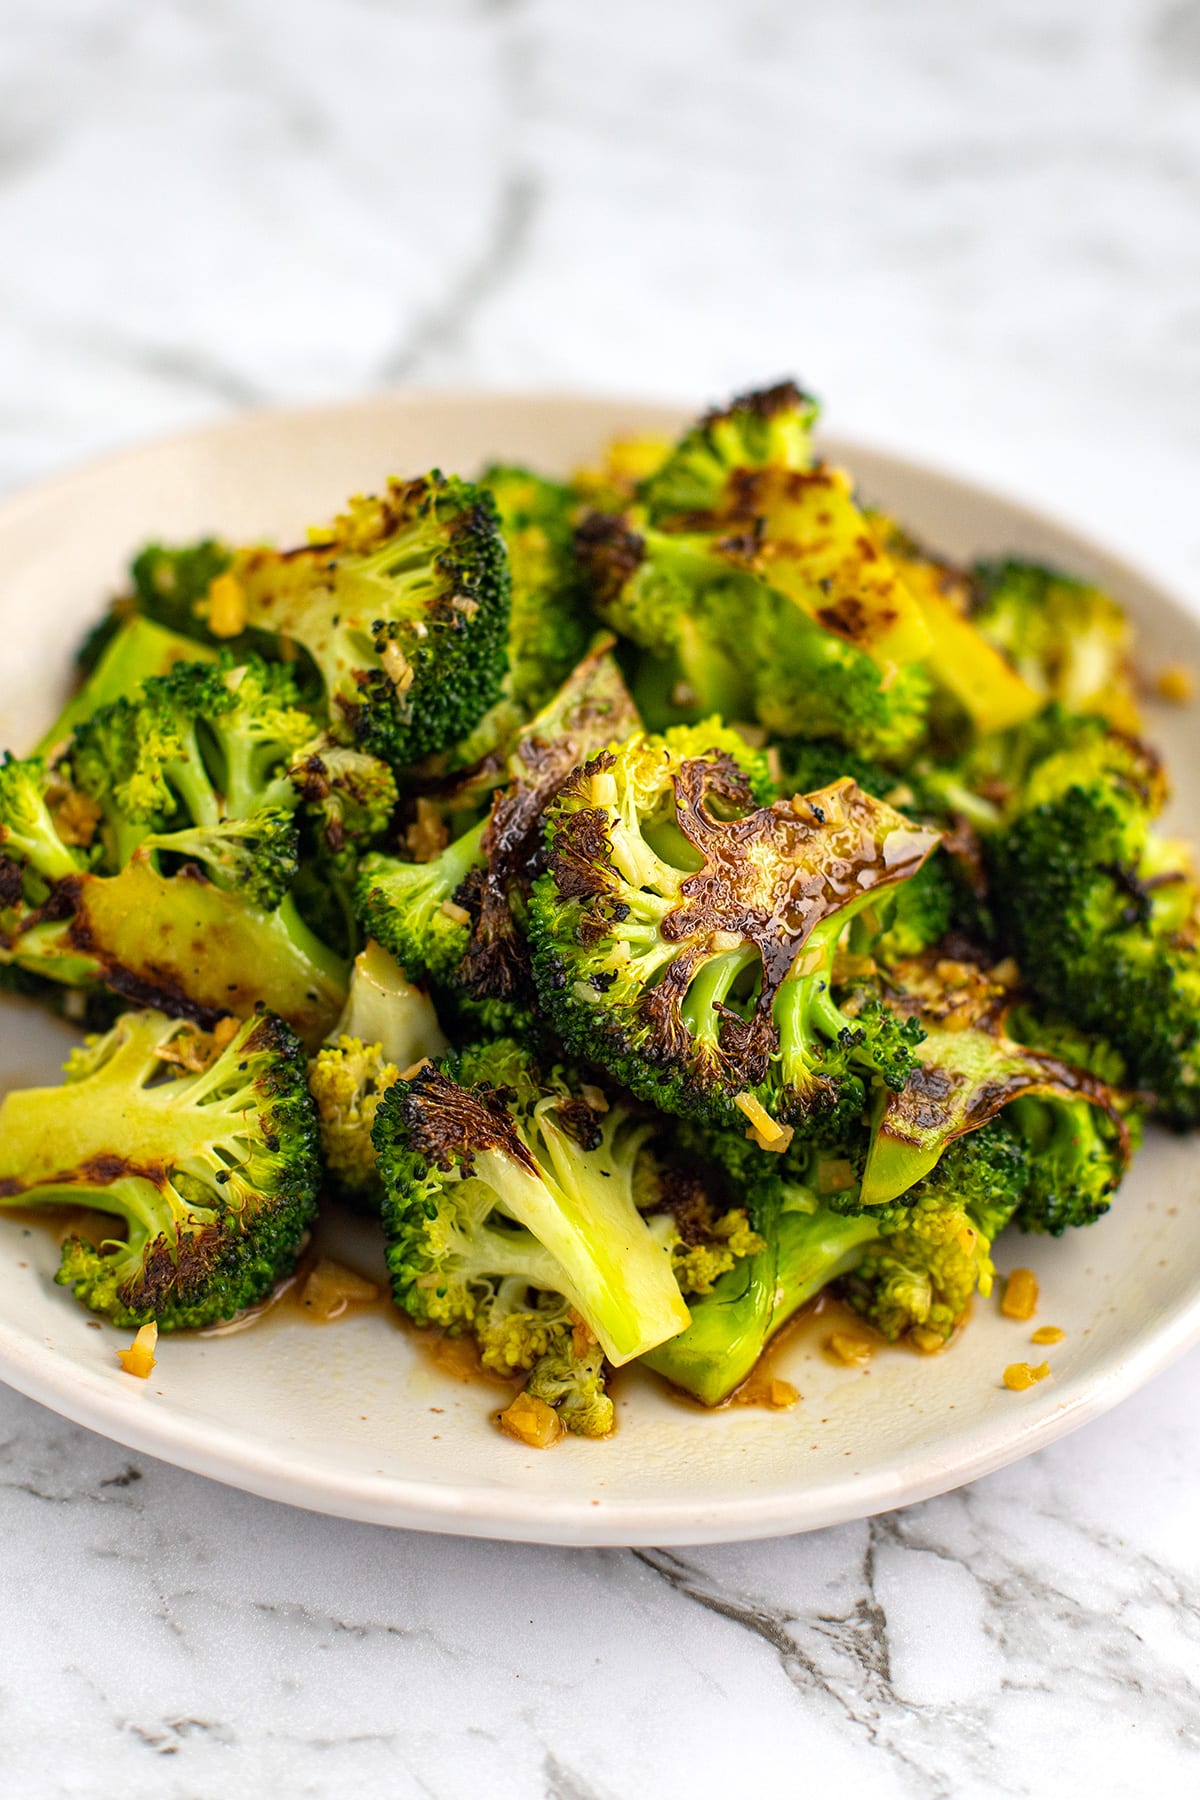 Pan fried broccoli with garlic and soy sauce